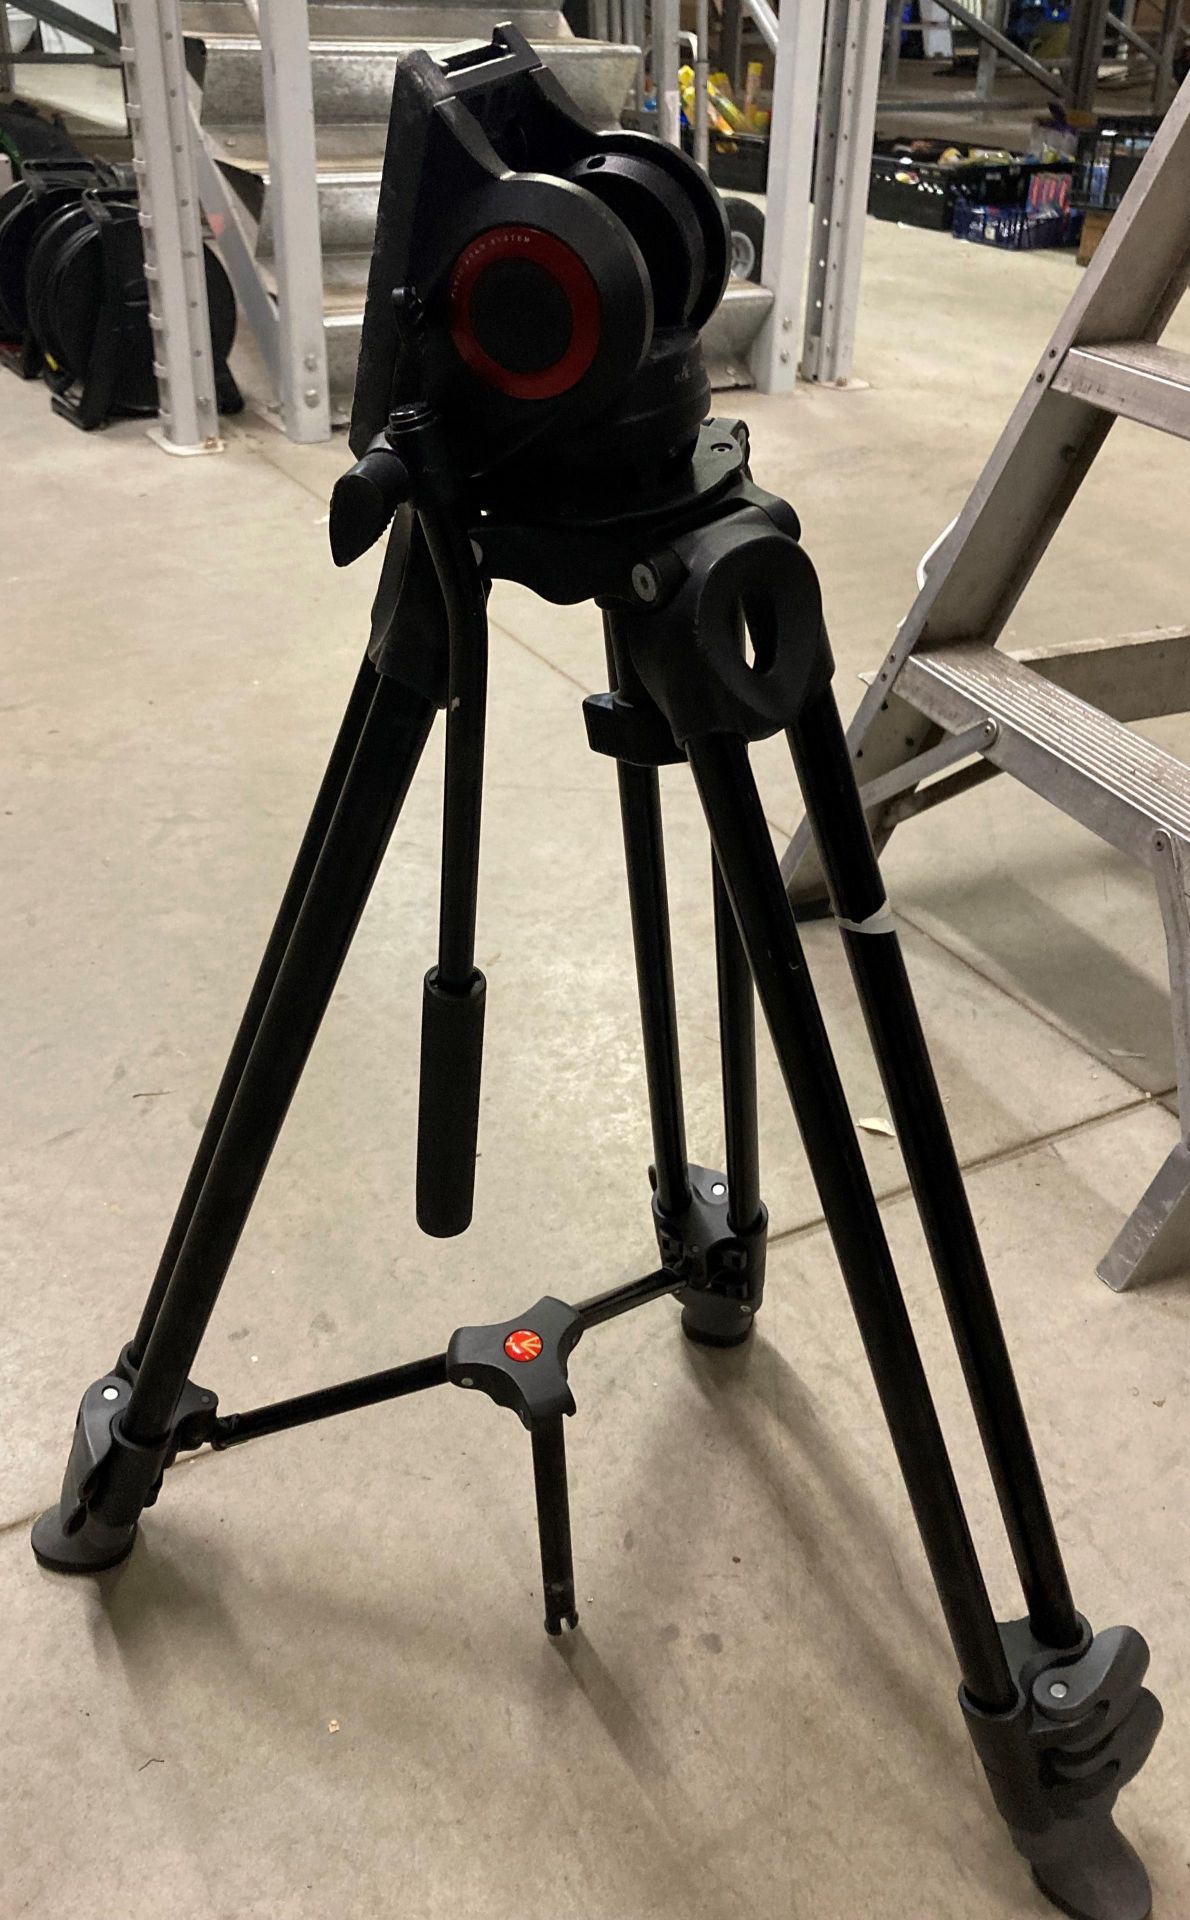 Manfrotto camera tripods and carry bag (saleroom location: D08) - Image 2 of 2